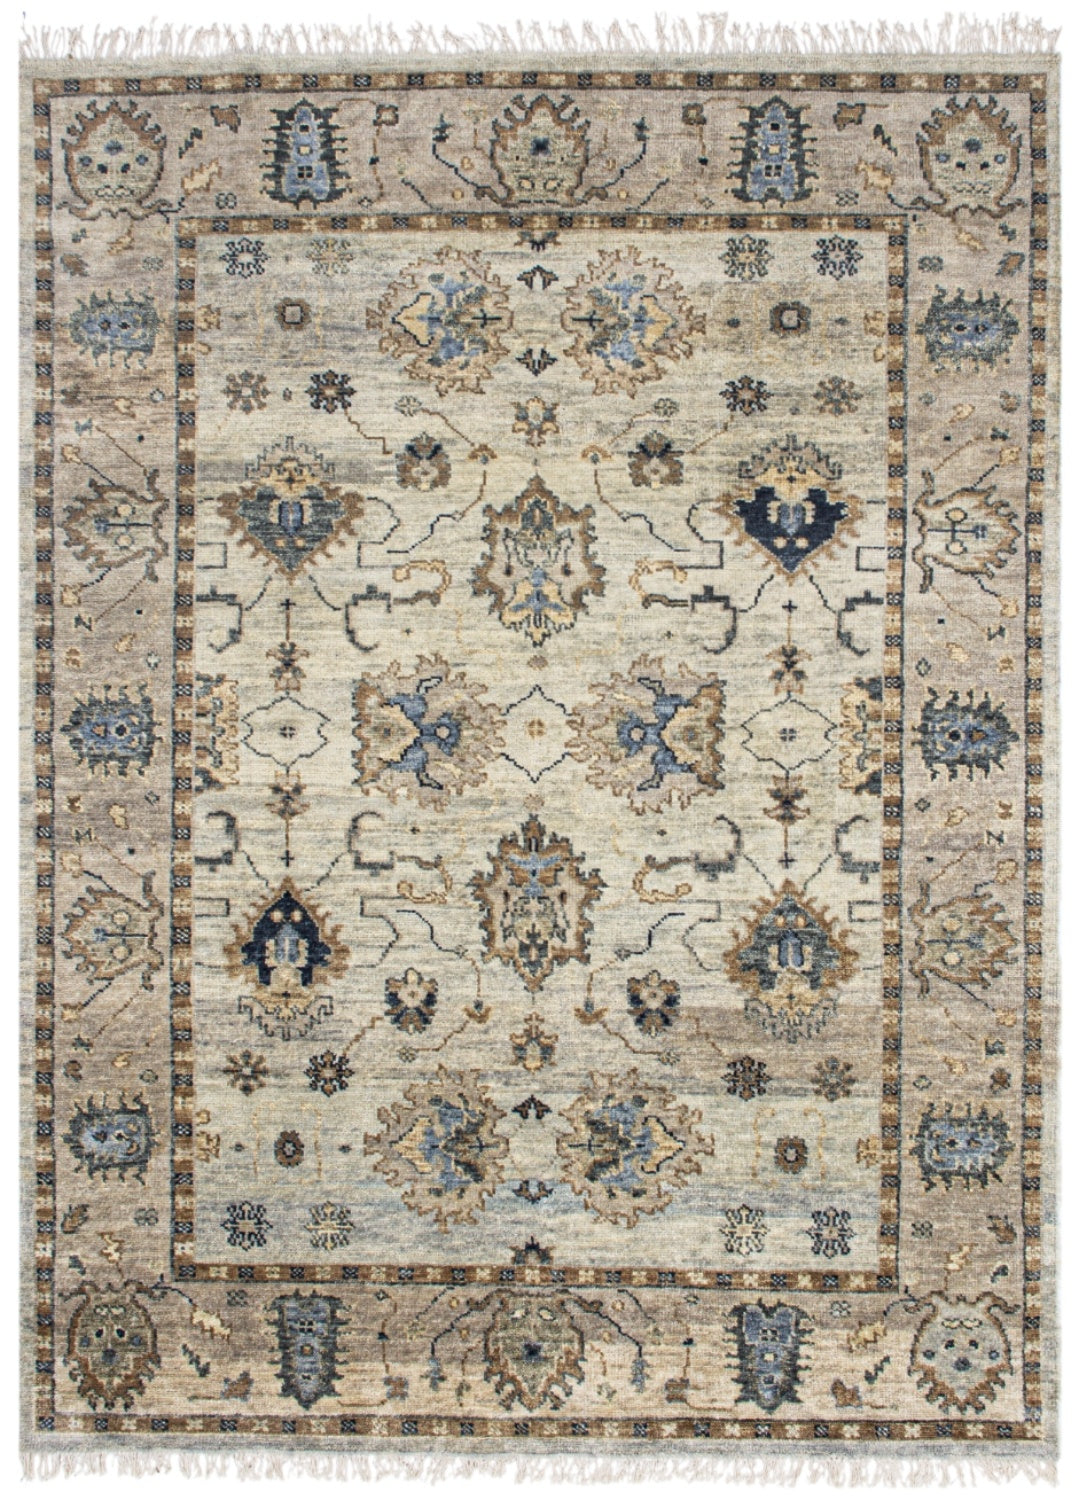 Sultanabad 5 Handwoven Traditional Rug